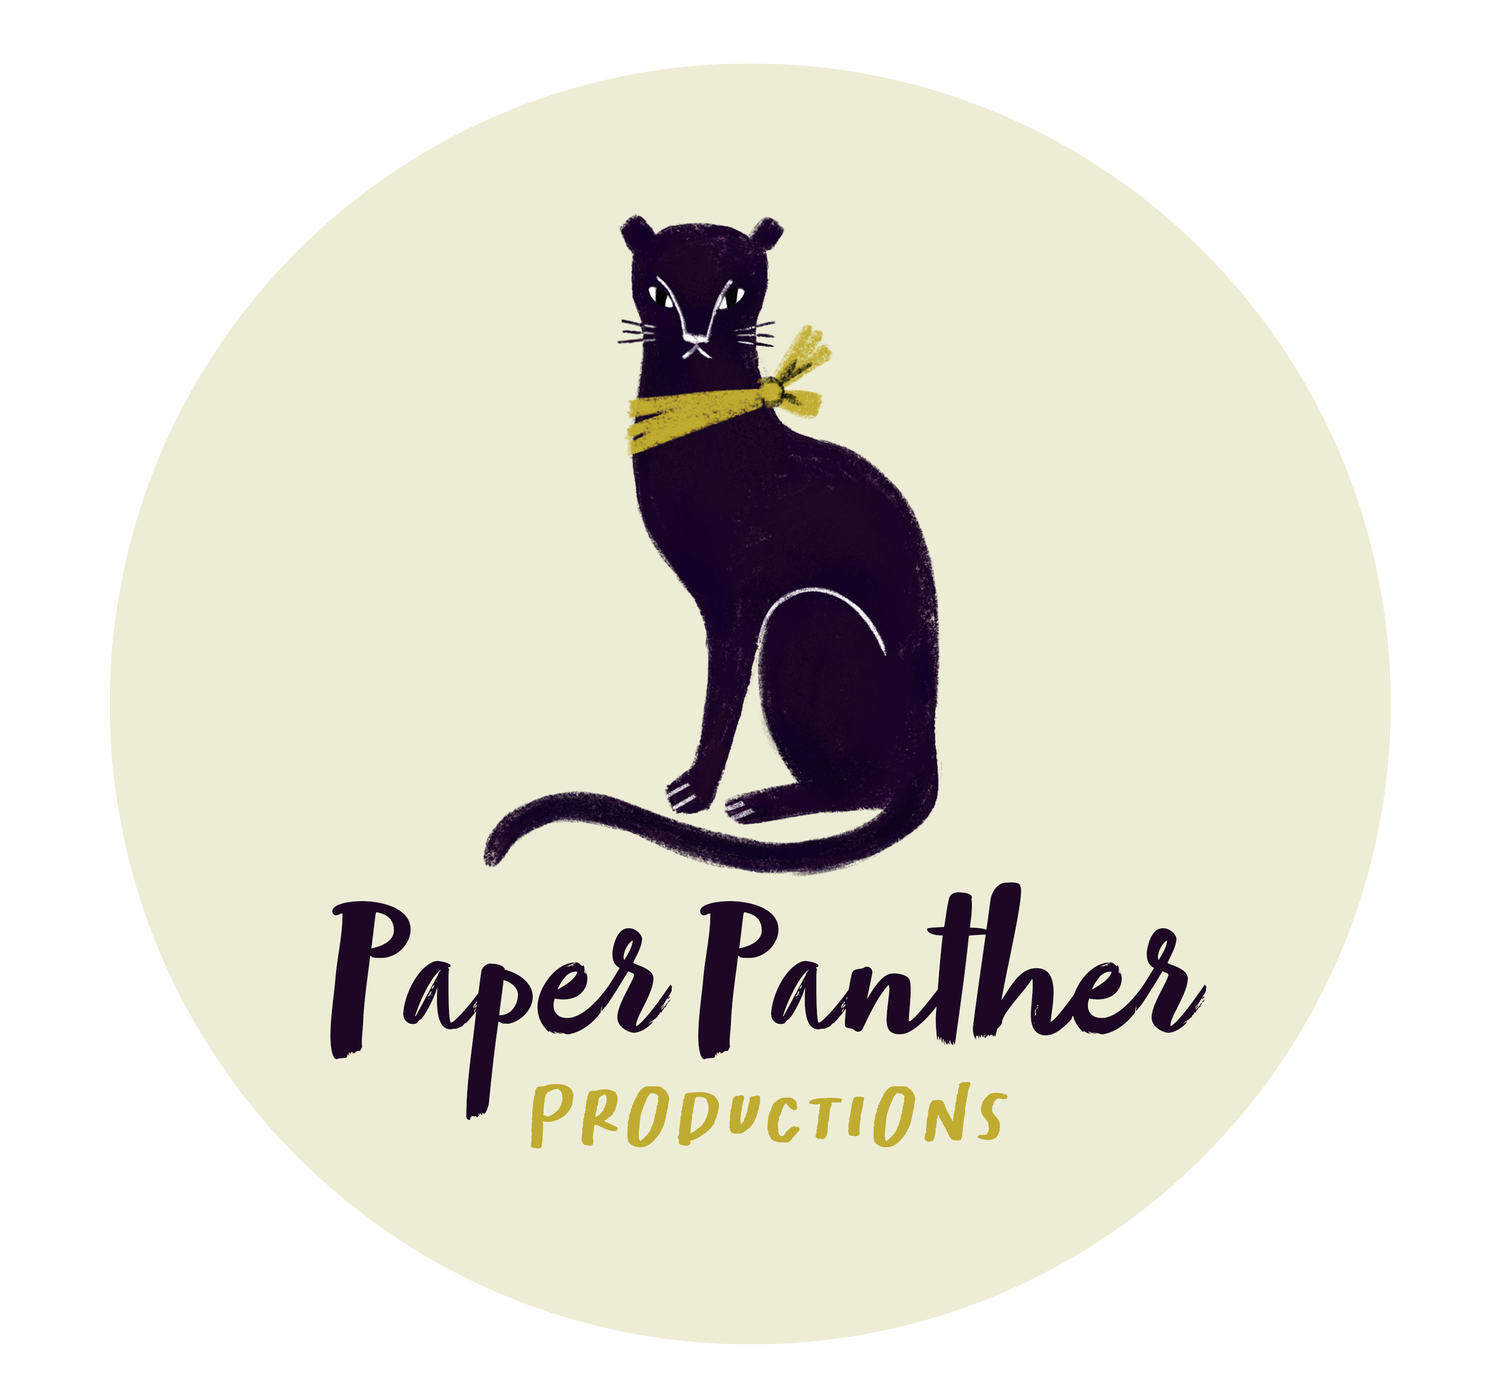 www.paperpanther.ie